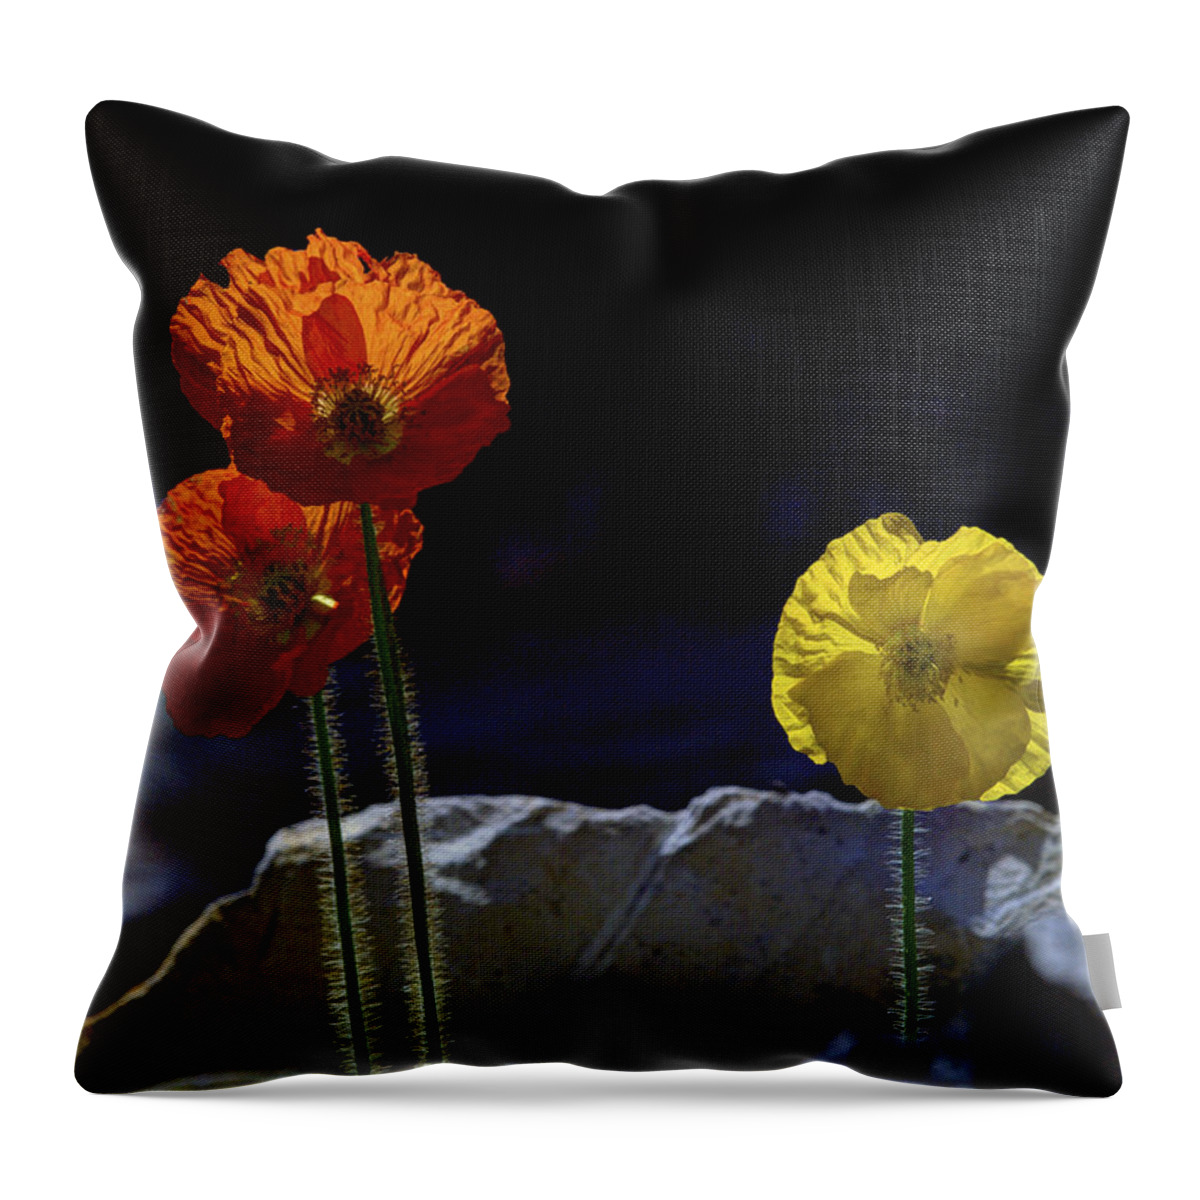 Iceland Poppies Throw Pillow featuring the photograph And One Yellow by Joe Schofield